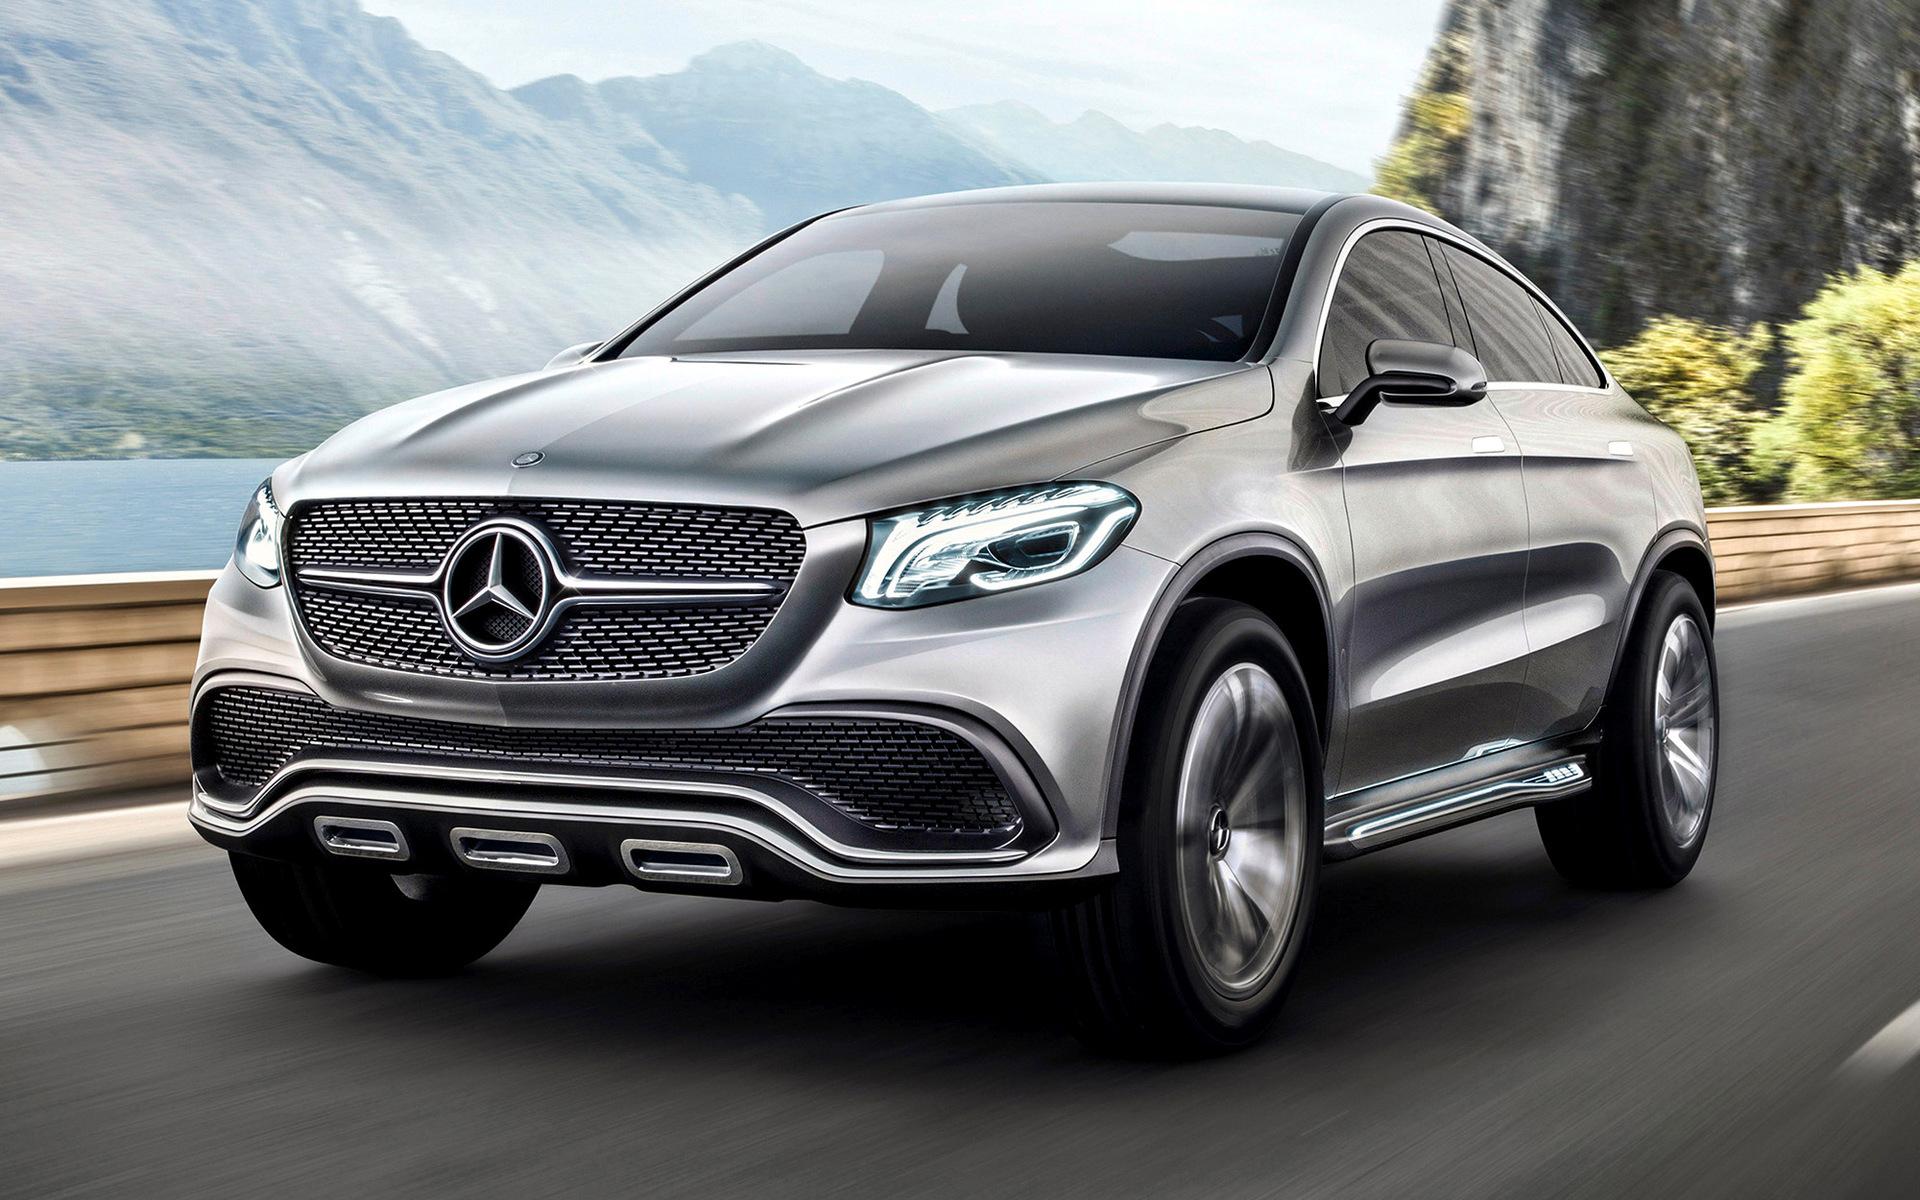 Mercedes Benz Concept Coupe SUV And HD Image